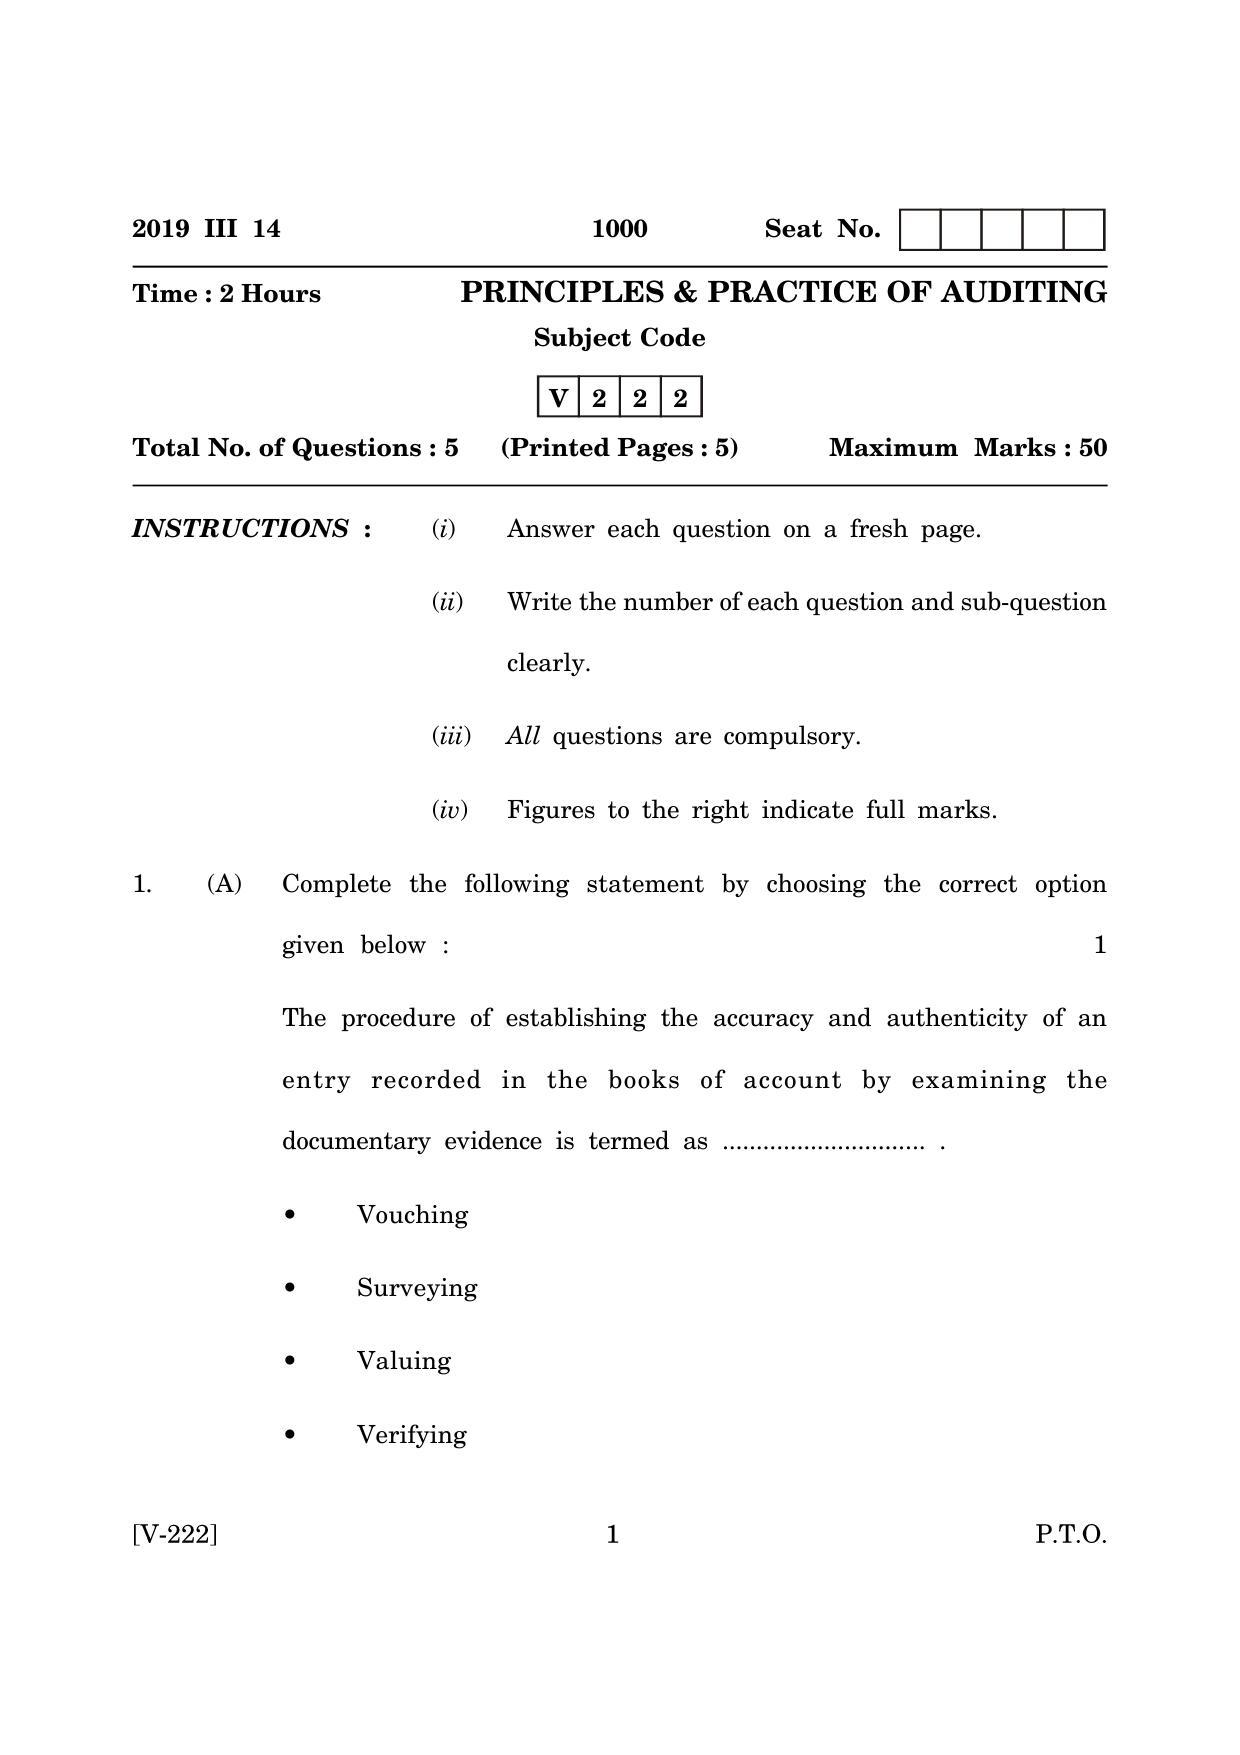 Goa Board Class 12 Principles & Practice of Auditing  2019 (March 2019) Question Paper - Page 1